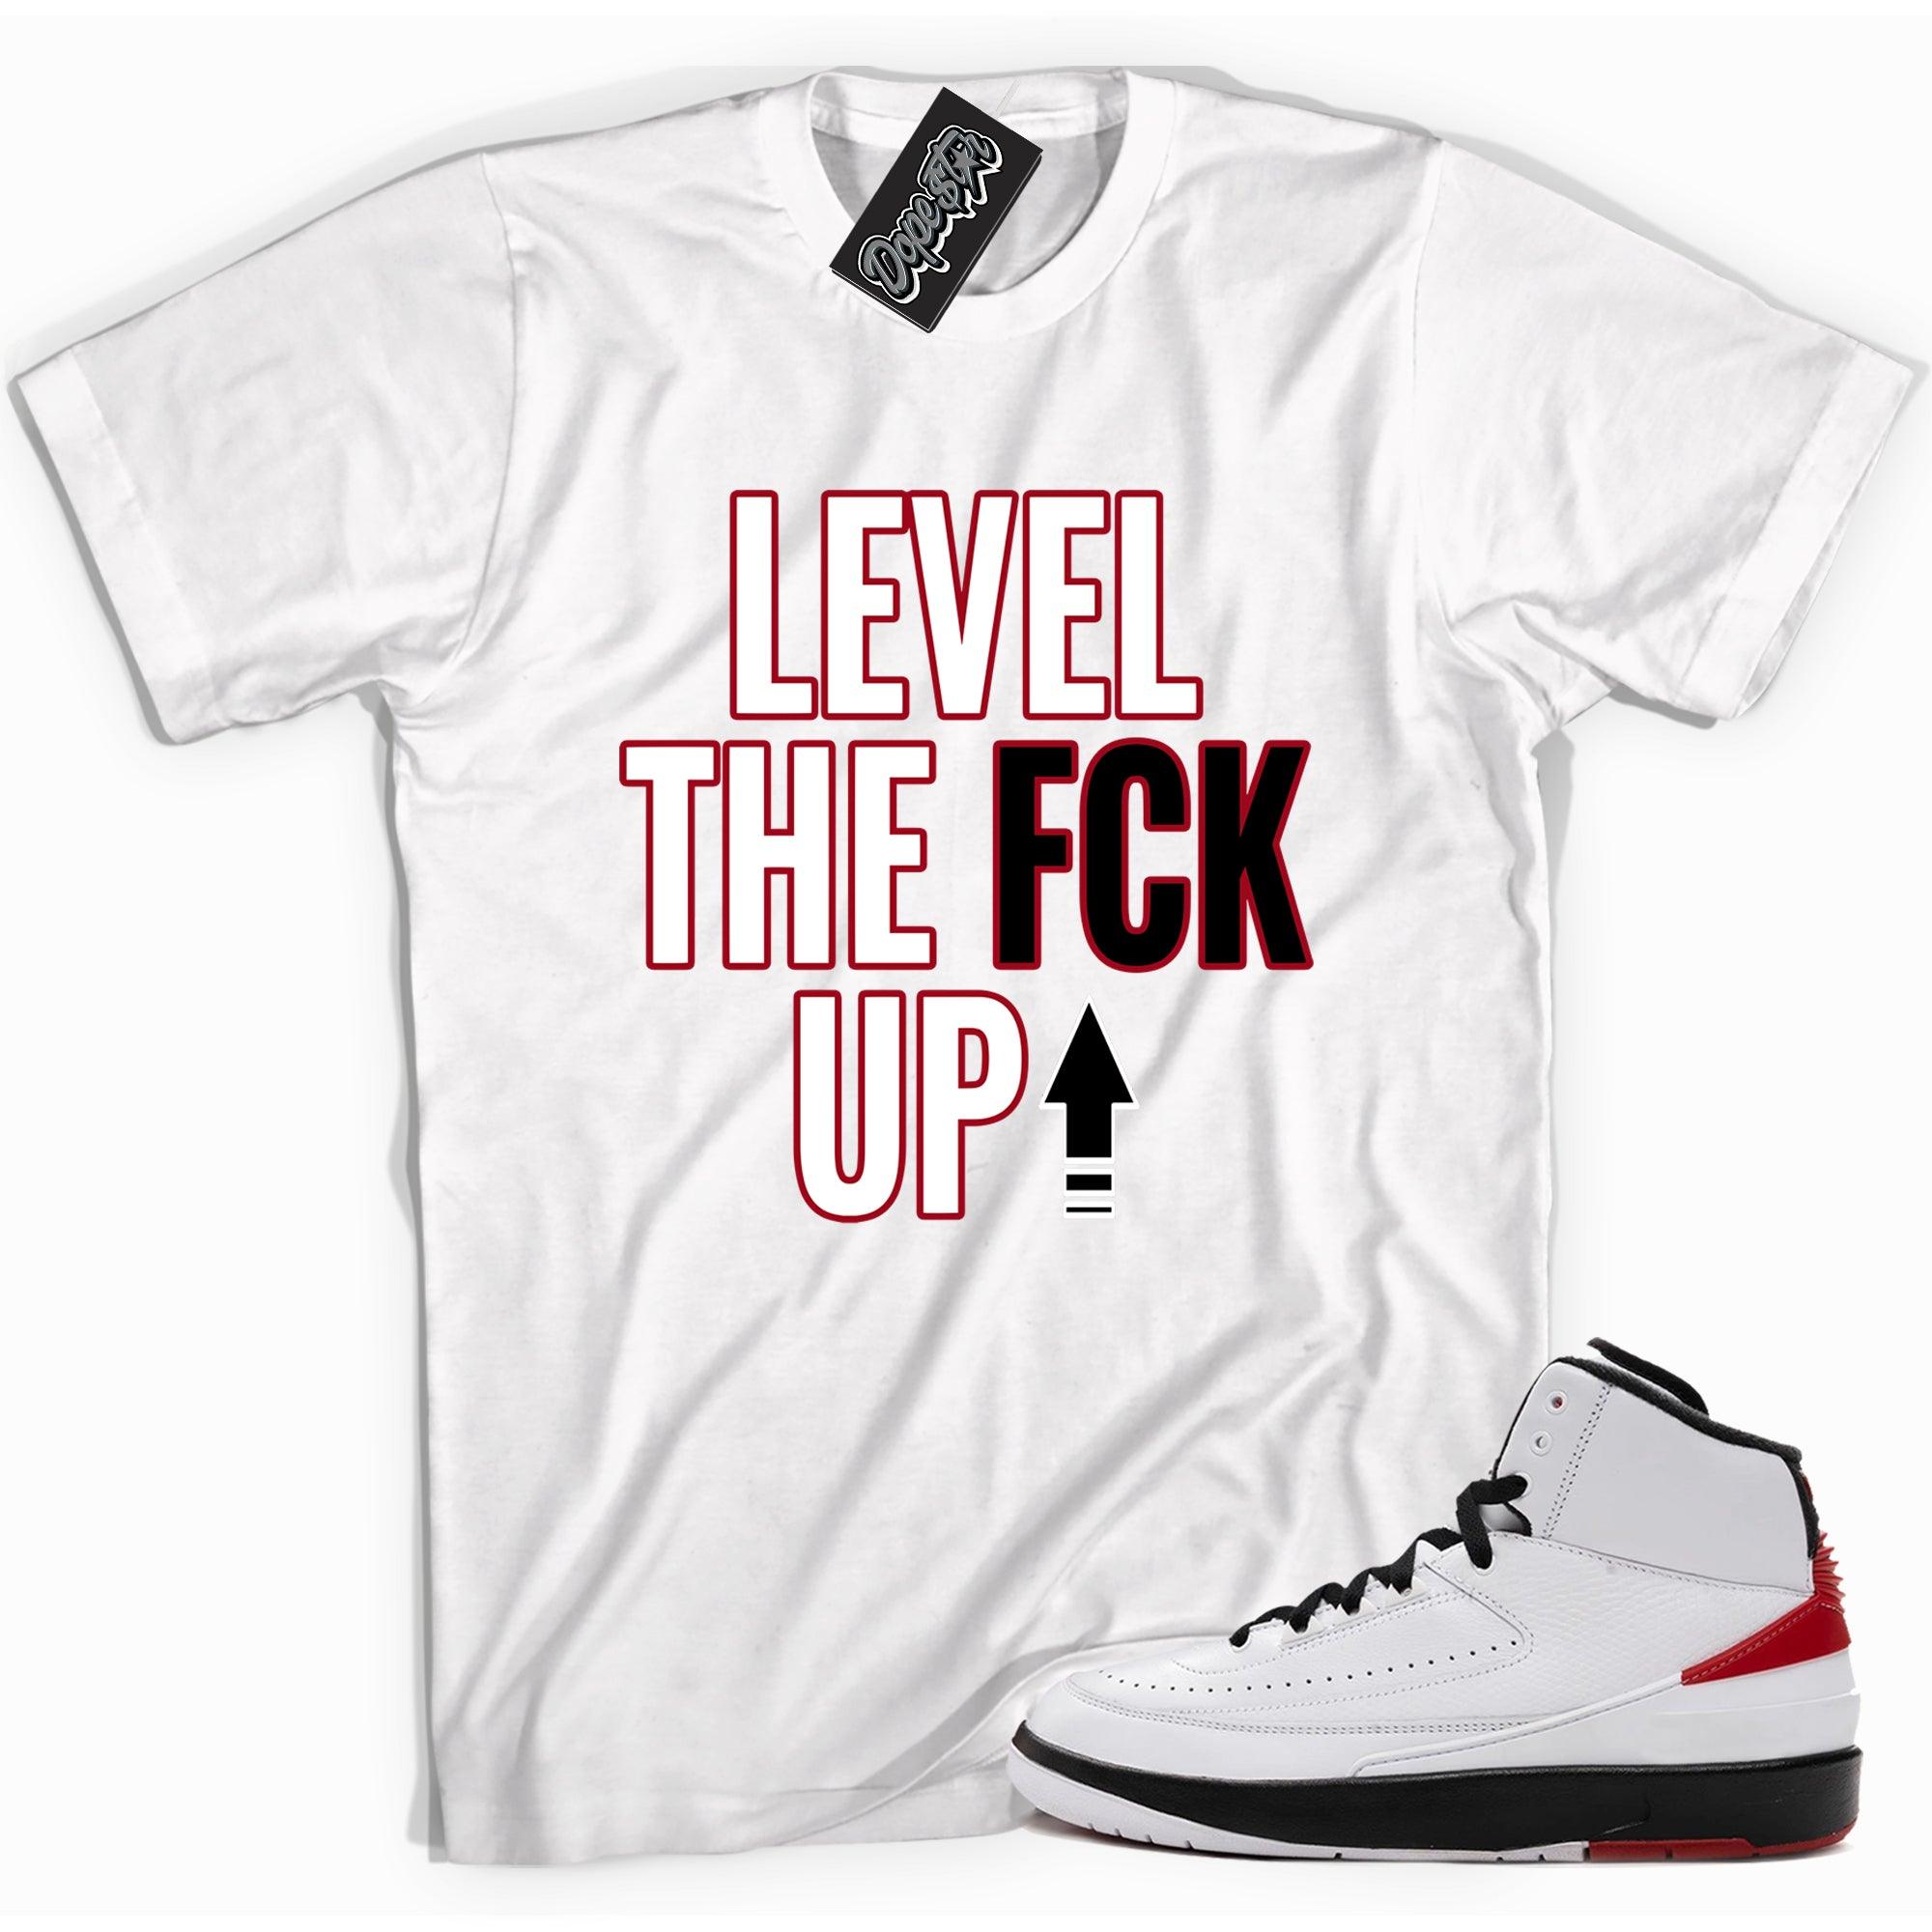 Cool white graphic tee with 'Level Up' print, that perfectly matches Air Jordan 2 Retro OG Chicago sneakers.